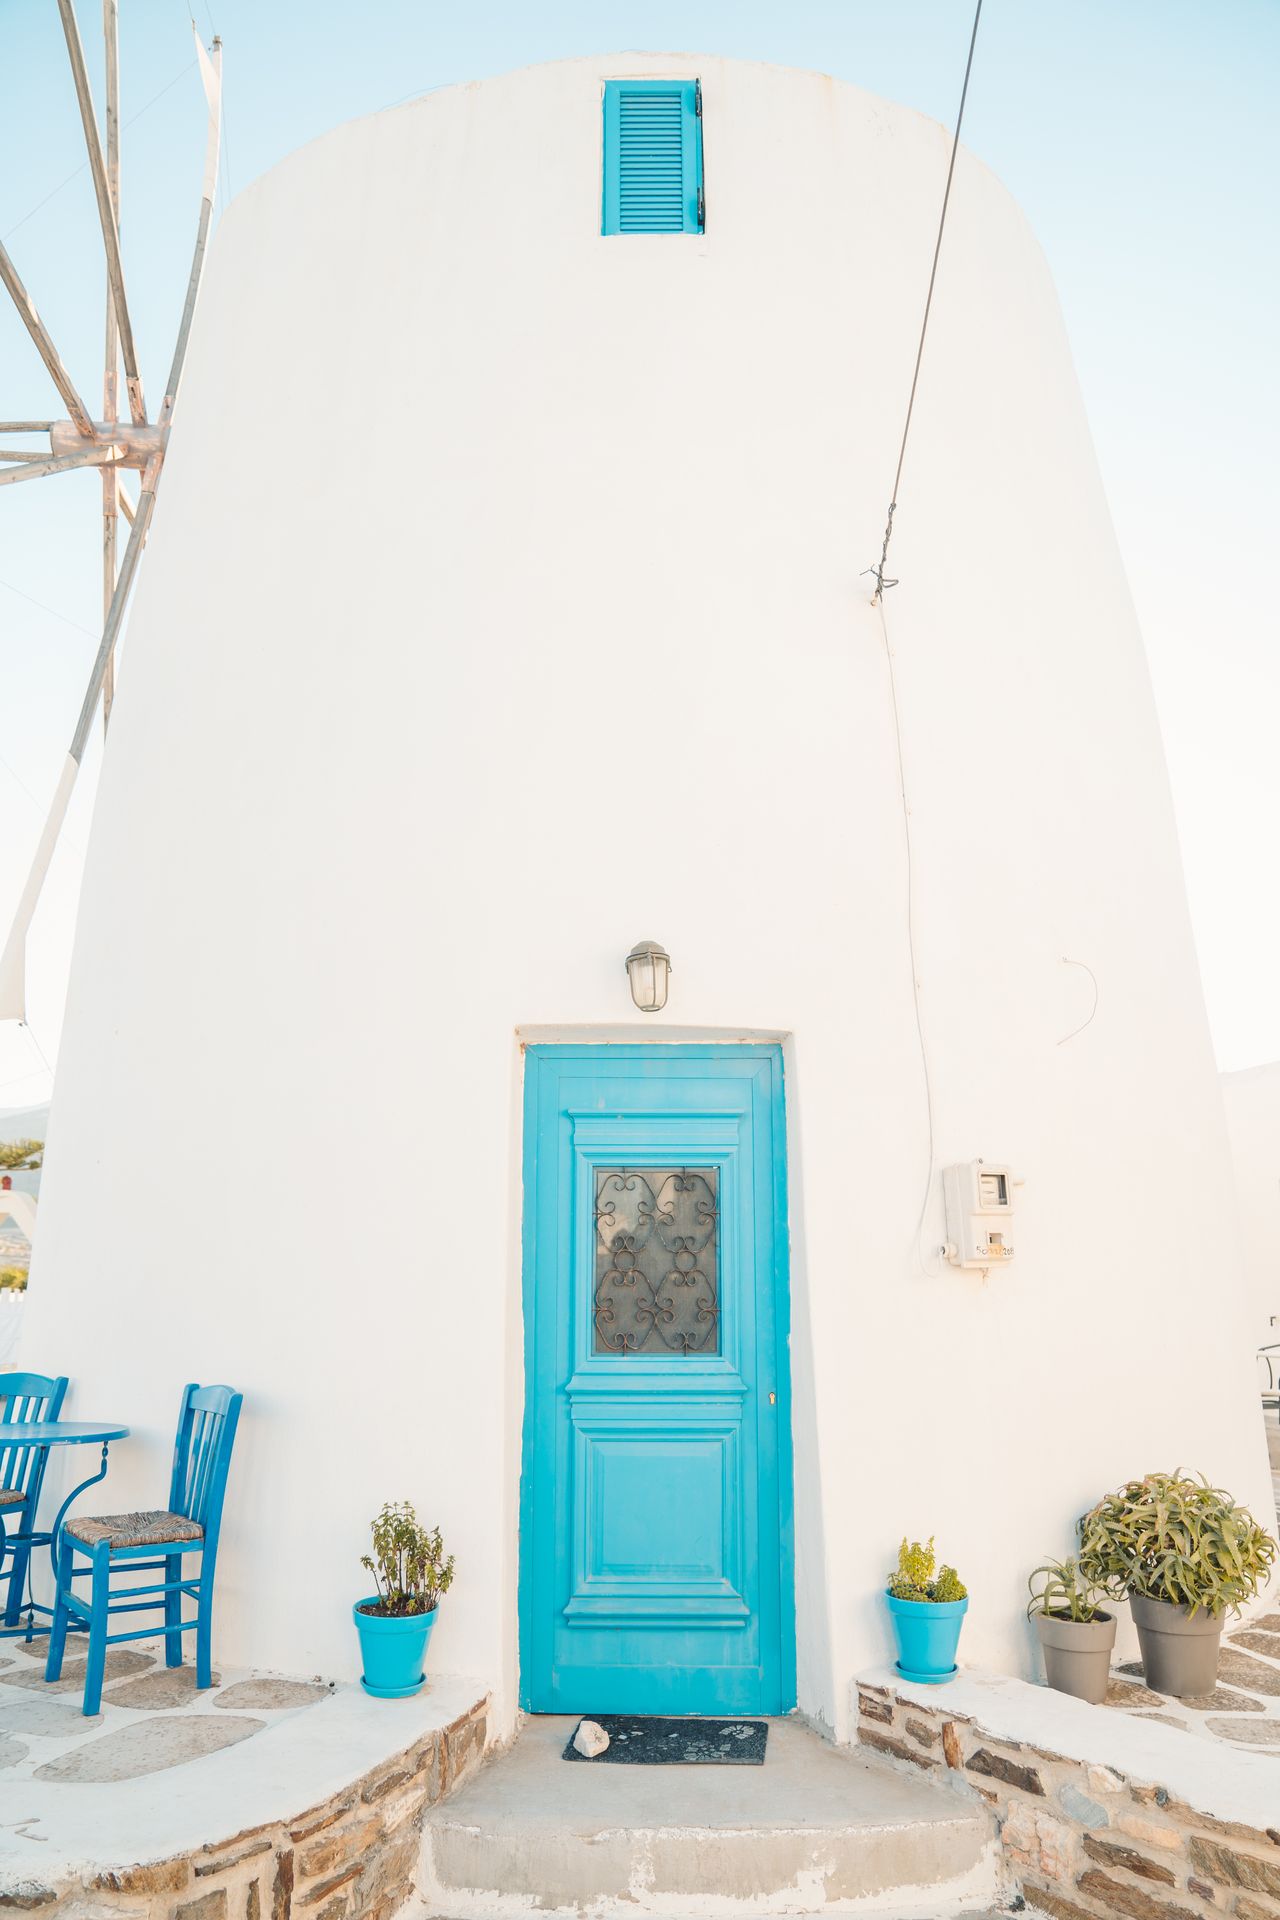 There are more blues and whites to enjoy in Marmara & a windmill that greets you as you enter the village.